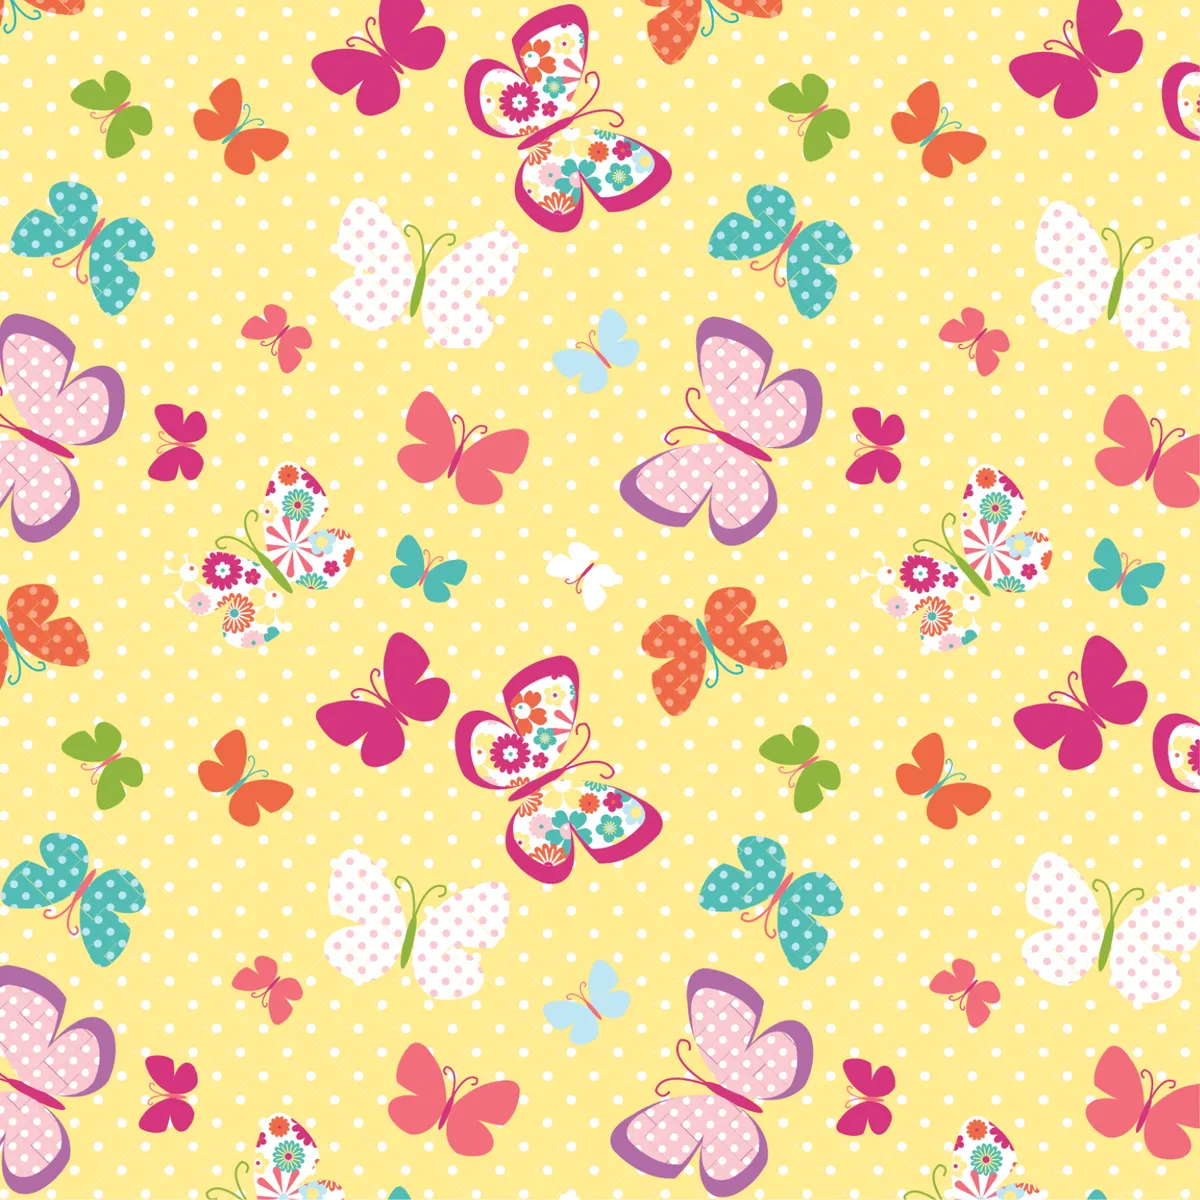 Free Butterflies and Blooms patterned papers 01